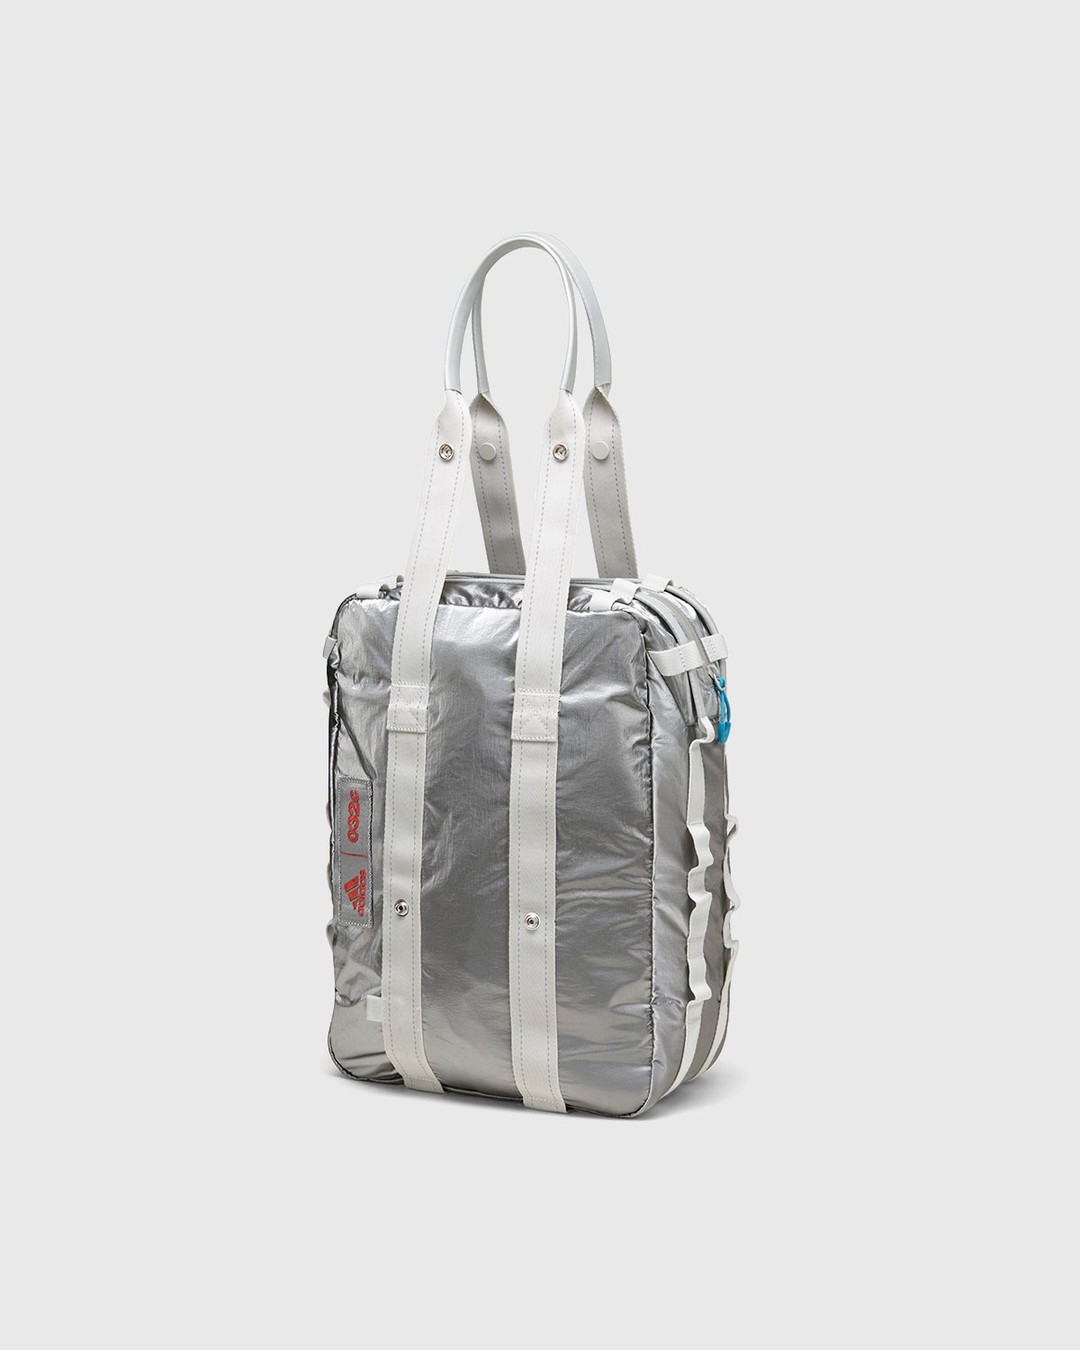 Adidas x 032c – Tote Greone - Tote Bags - White - Image 2